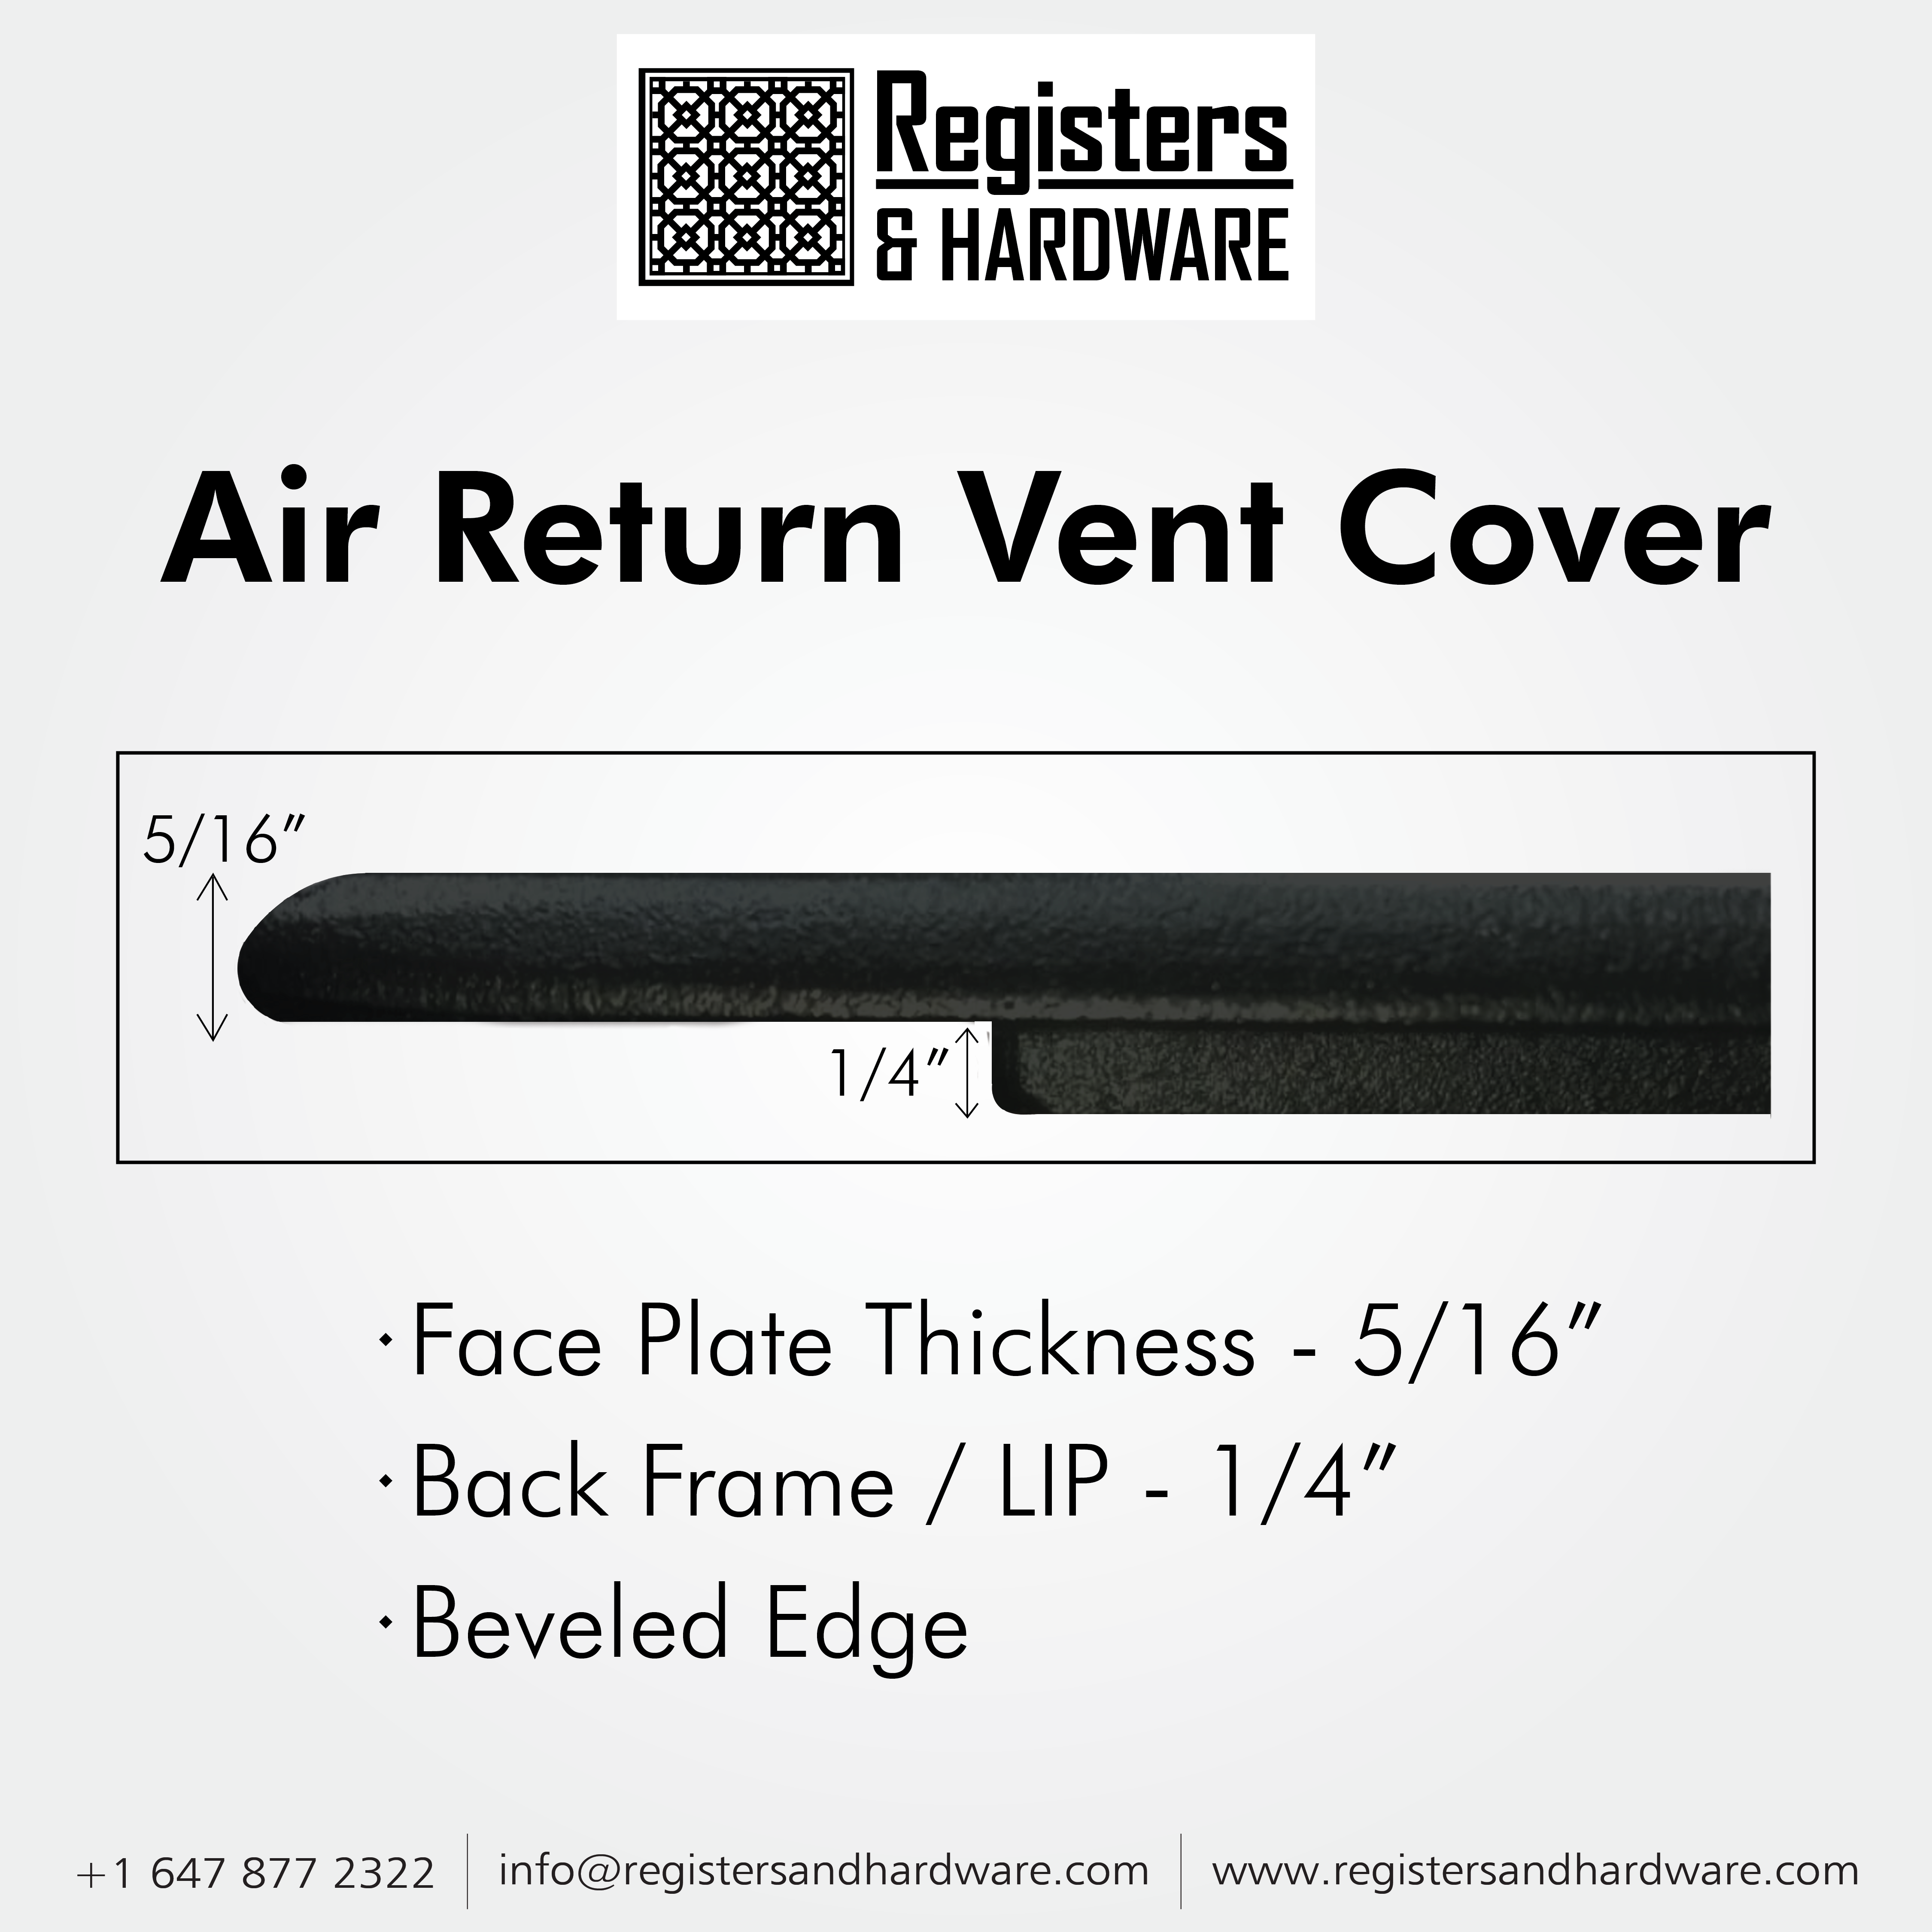 Achtek AIR RETURN 10"x30" Duct Opening (Overall Size 12"x32") | Heavy Cast Aluminum Air Grille HVAC Duct || Powder Coated